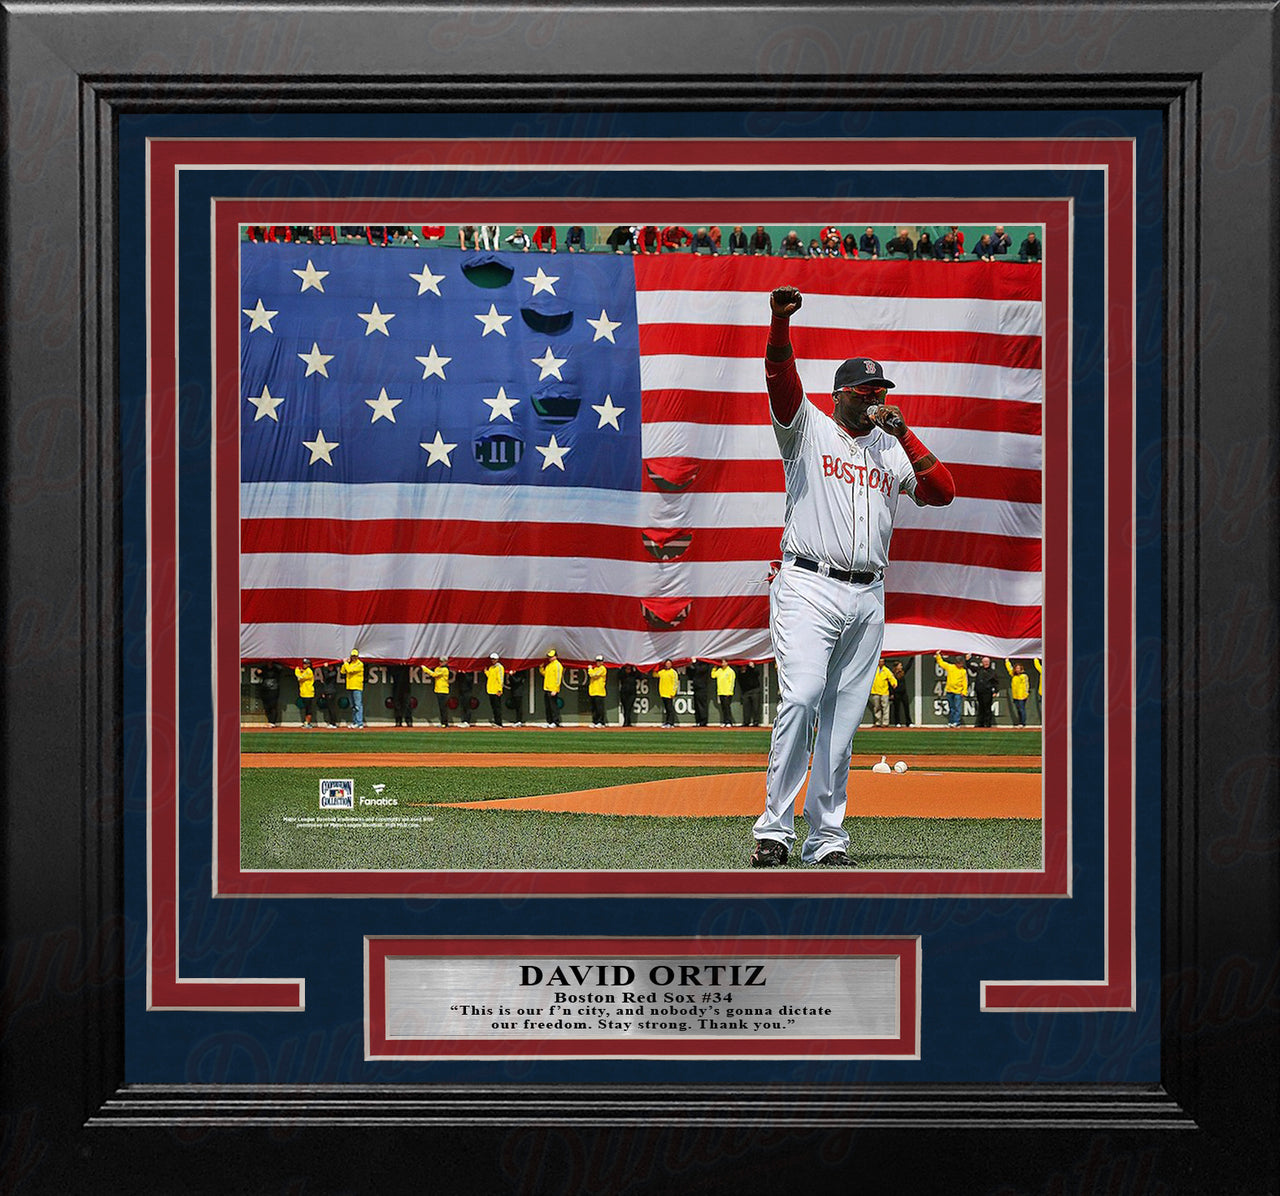 David Ortiz 2013 This is Our City Speech Boston Red Sox 8" x 10" Framed Baseball Photo